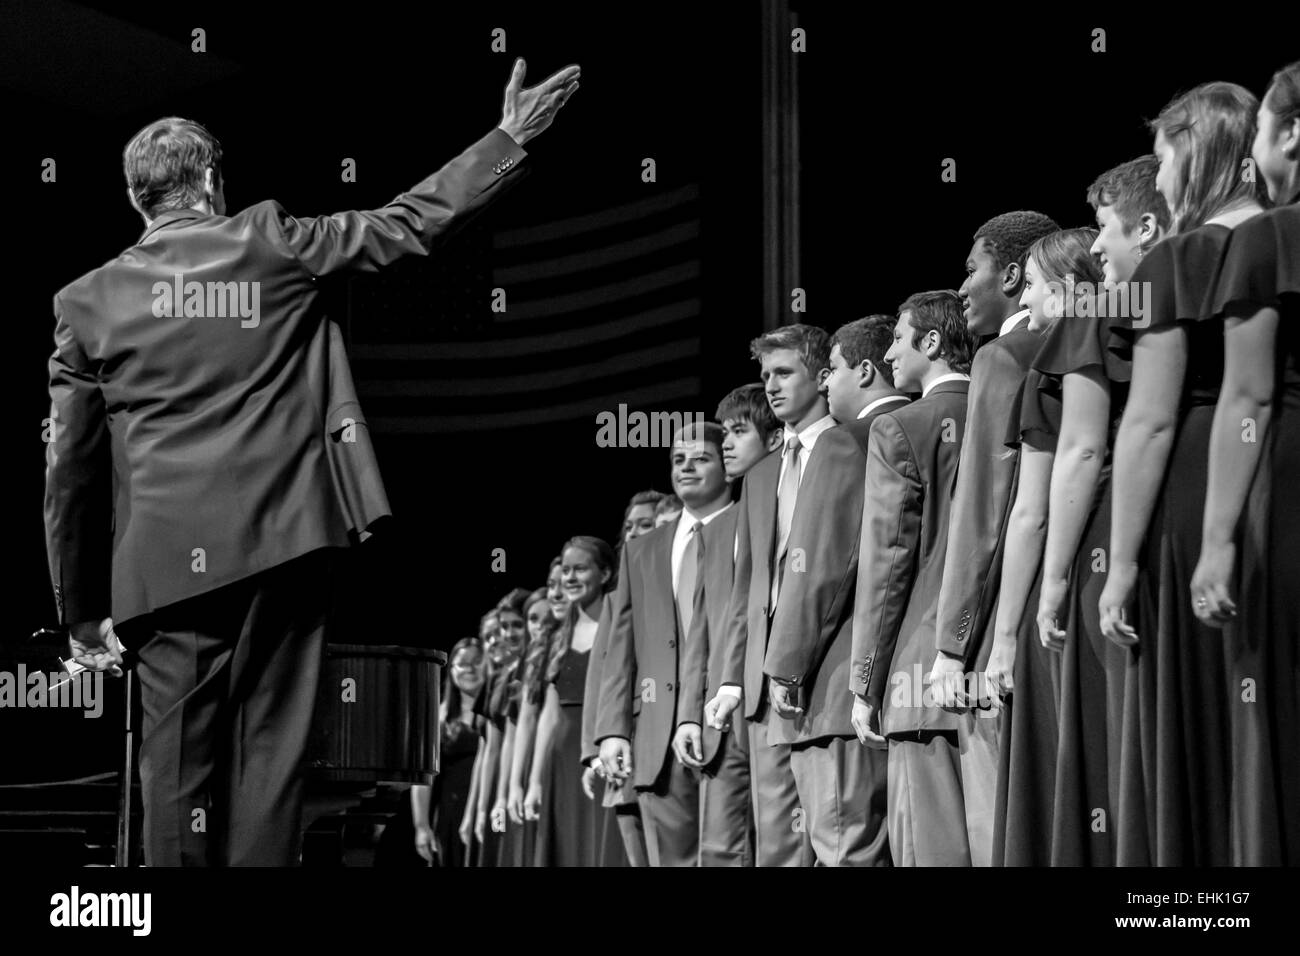 Choir Conductor Presents his an accomplished crowd after a winter choral presentation. Stock Photo